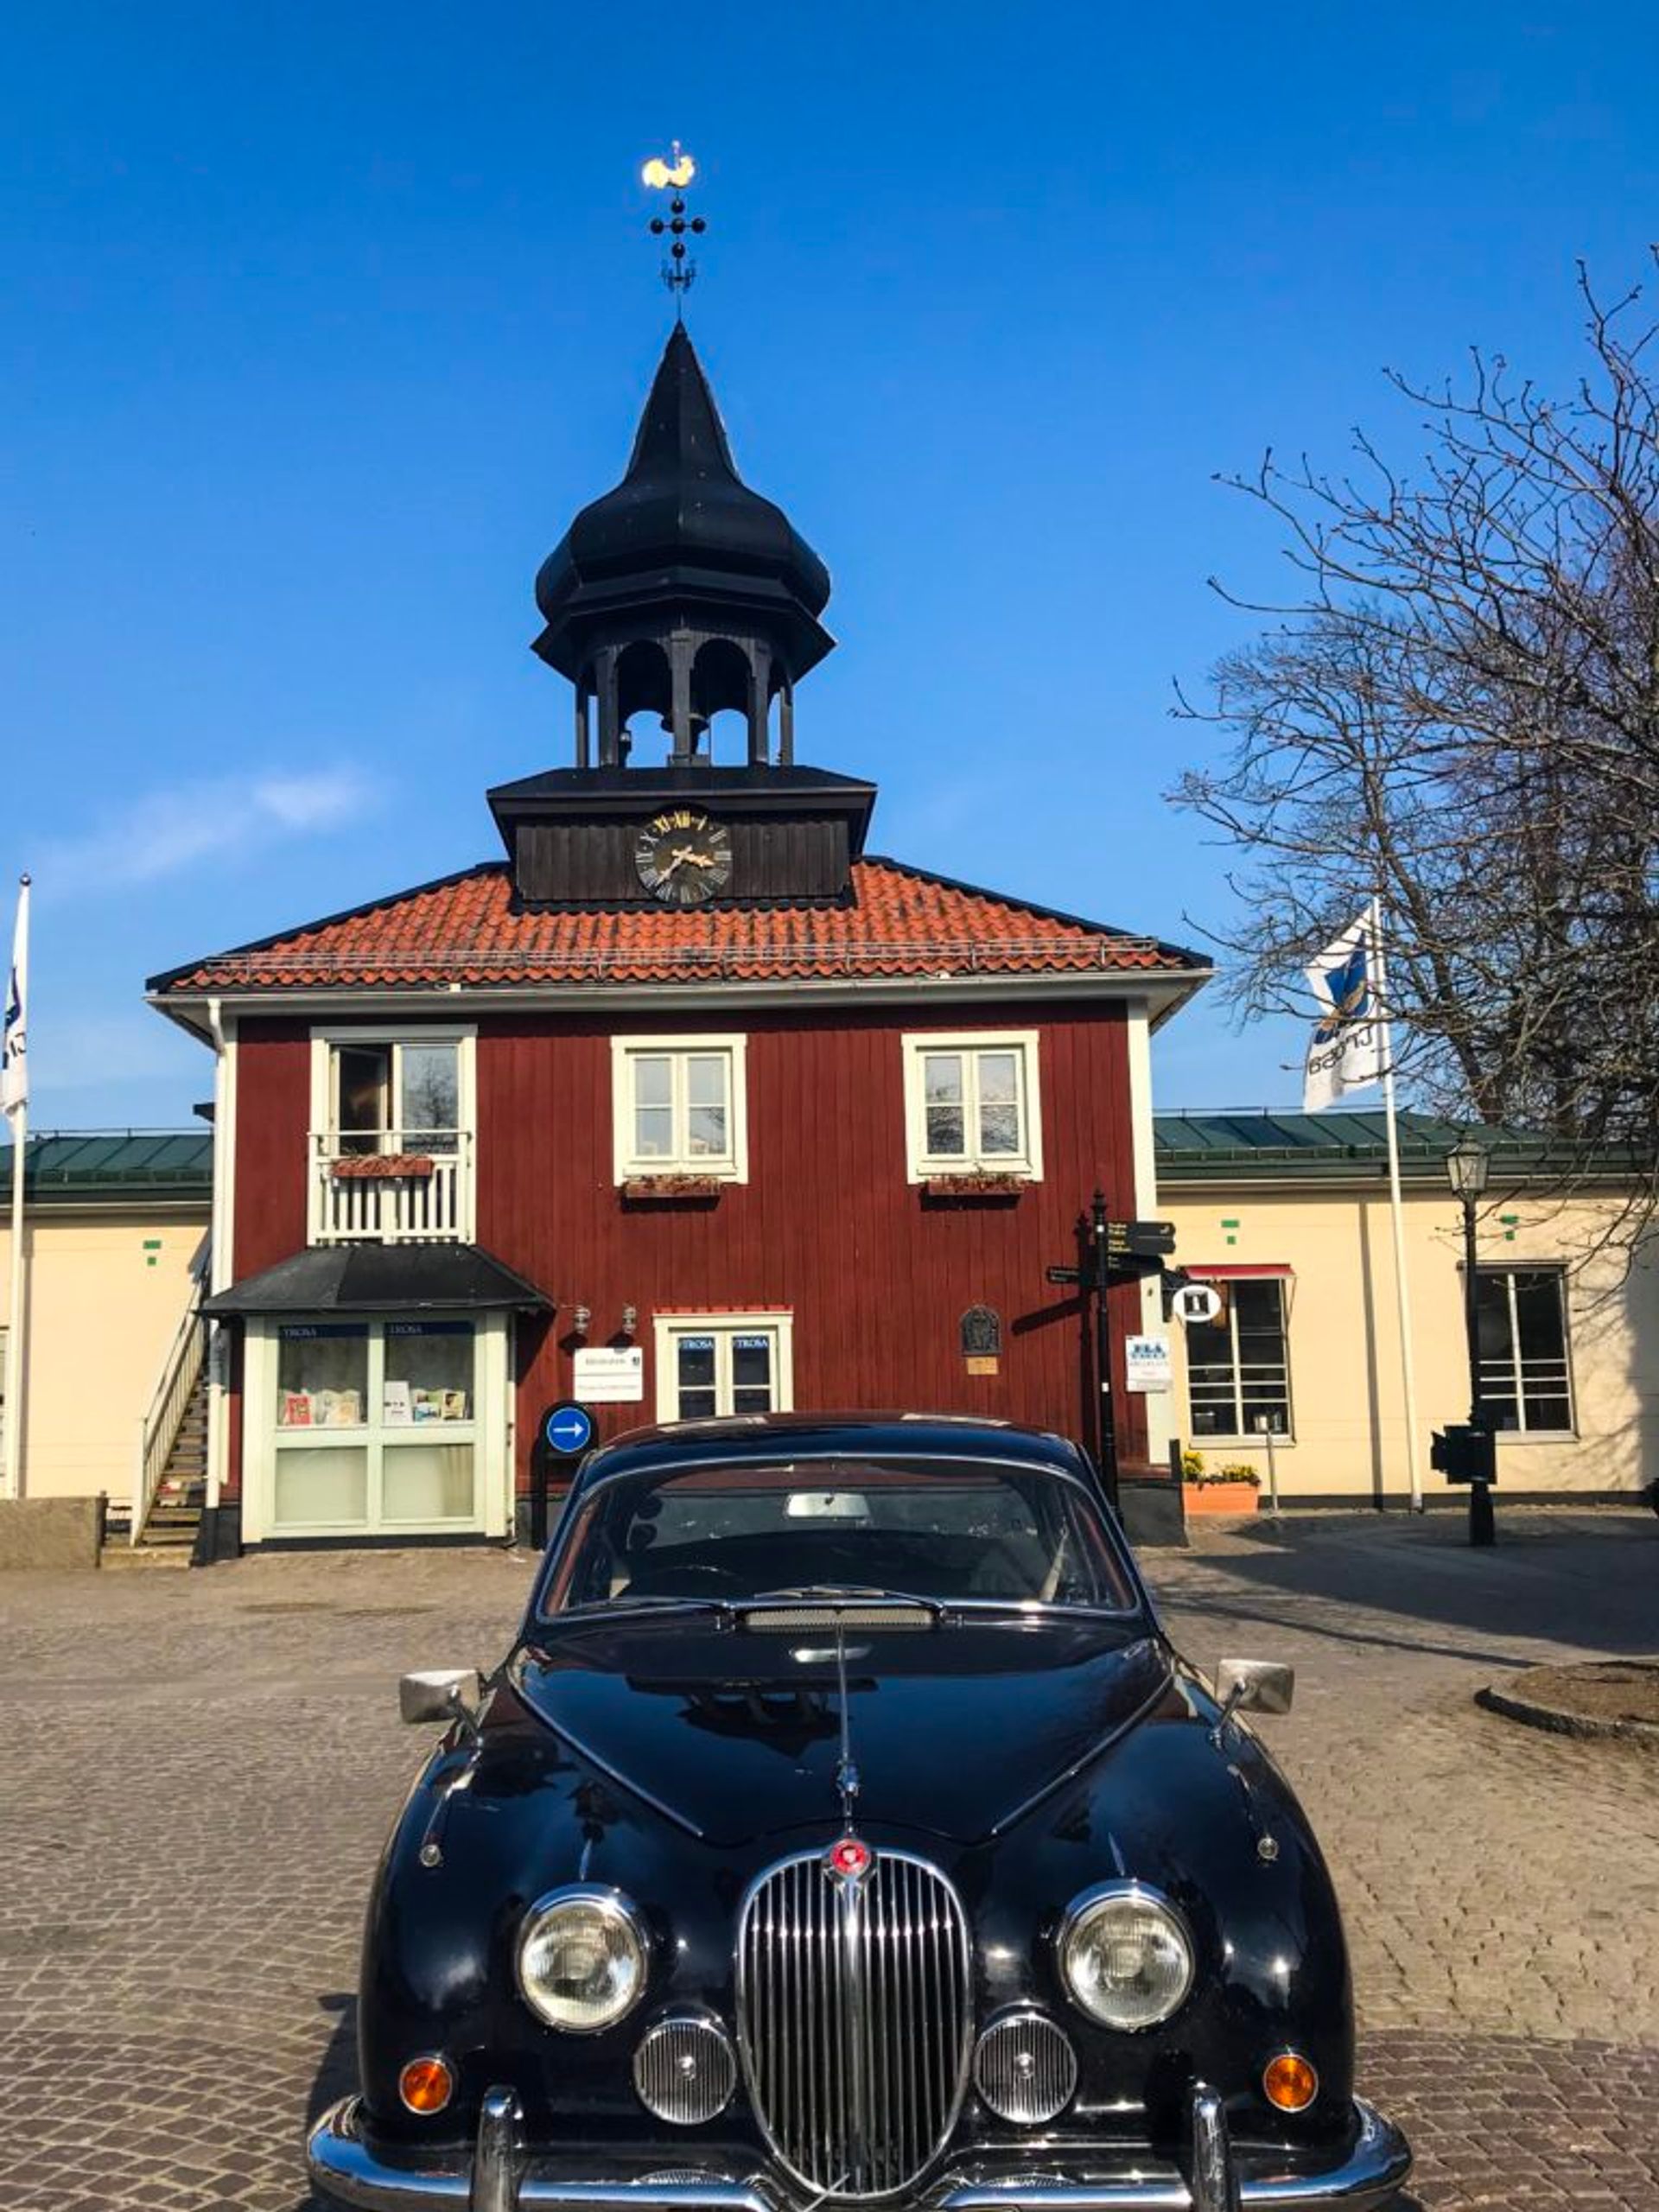 An old-fashioned car parked in front of a red building.